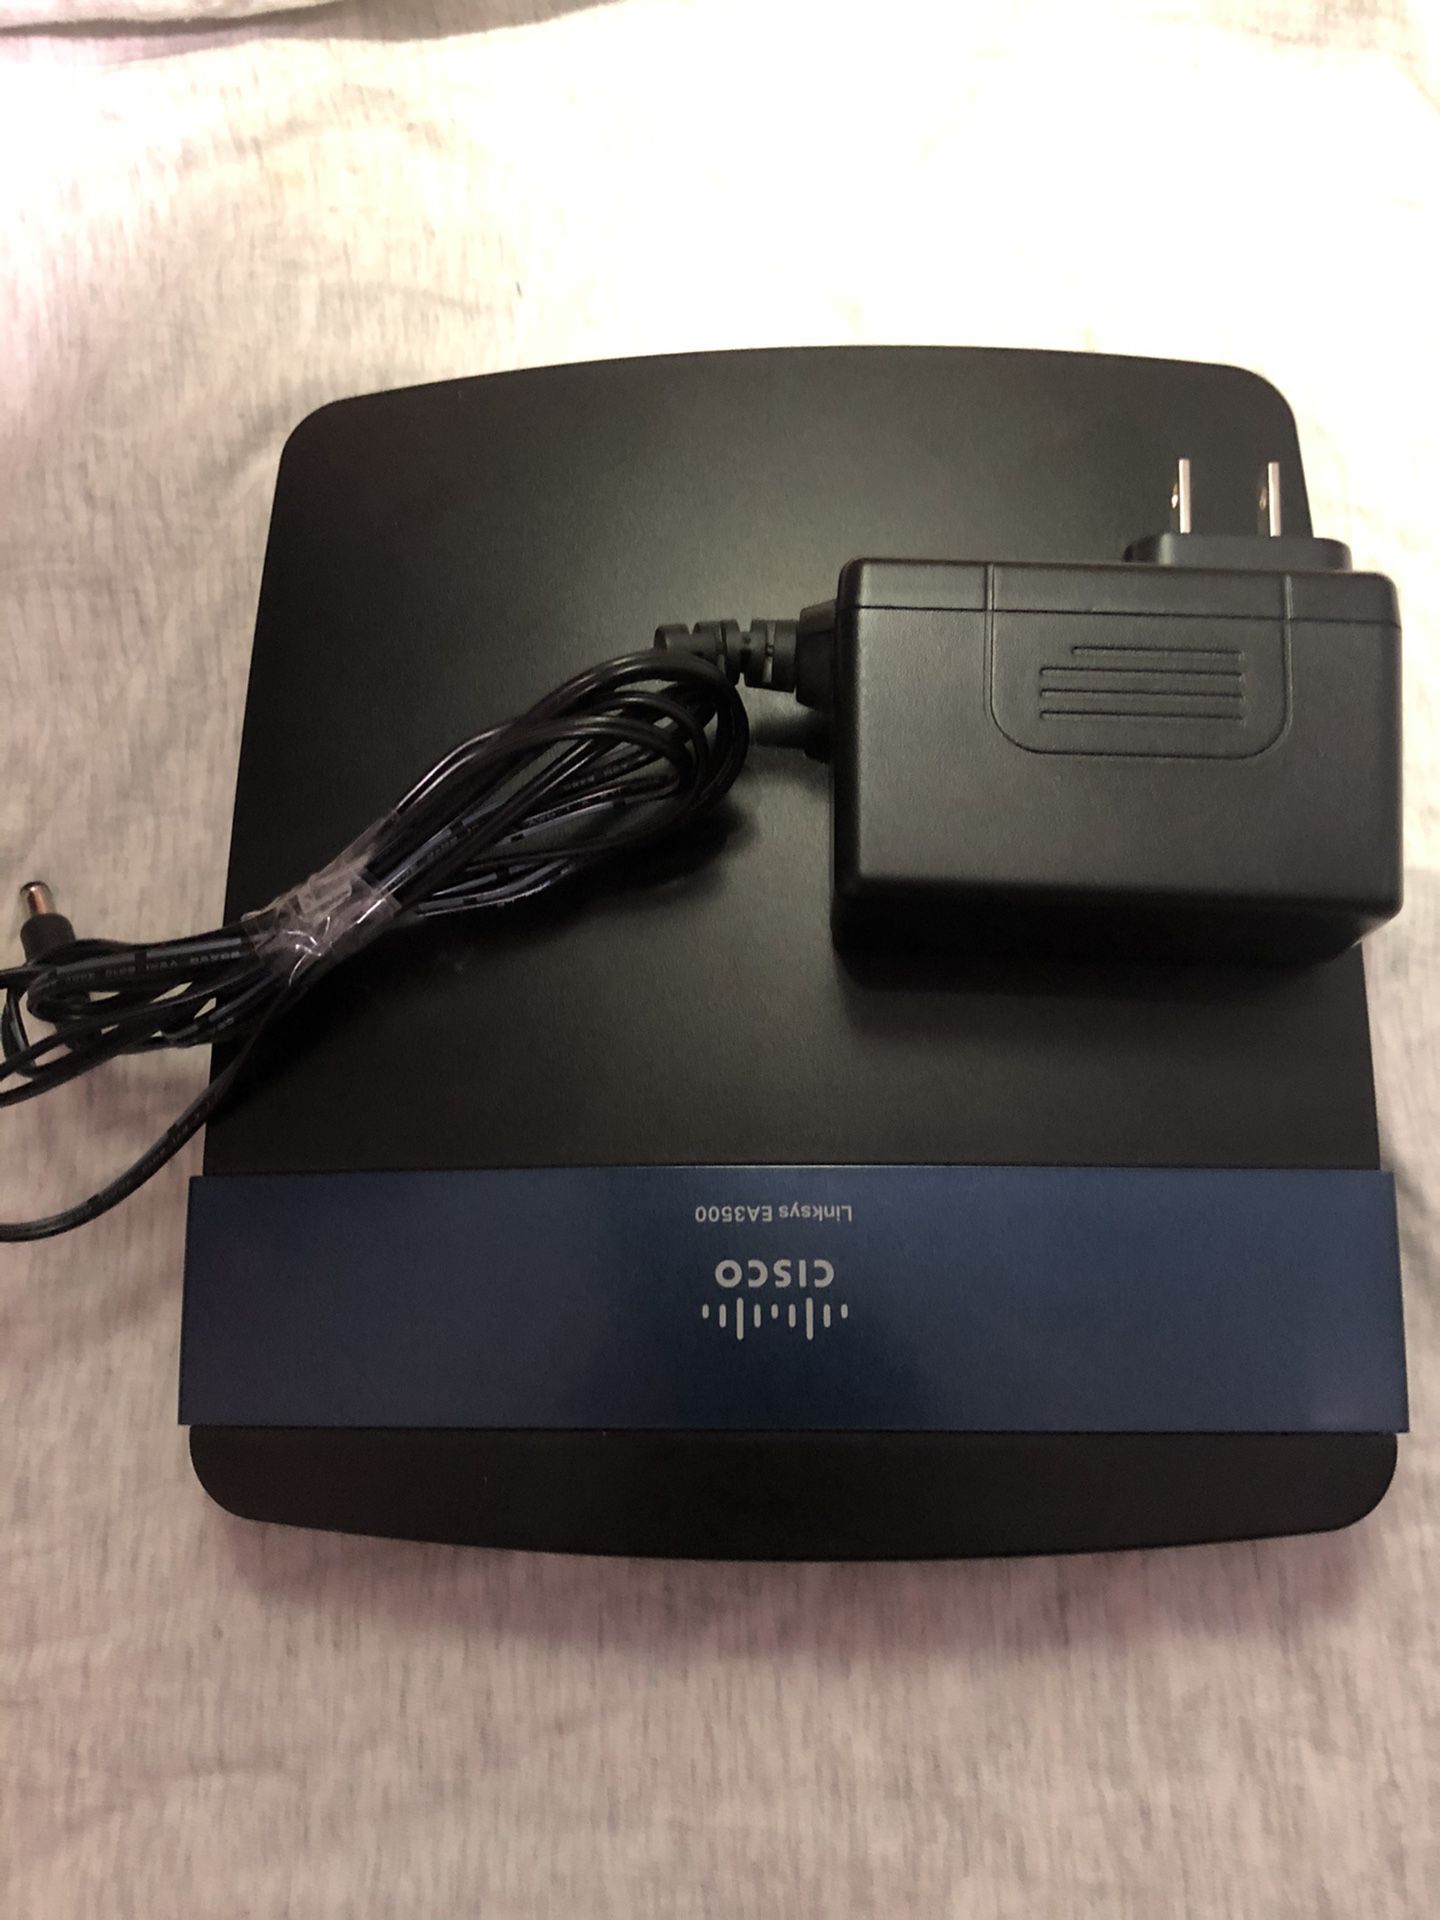 CISCO LINKSYS EA3500 DUAL-BAND N750 ROUTER WITH GIGABIT AND USB